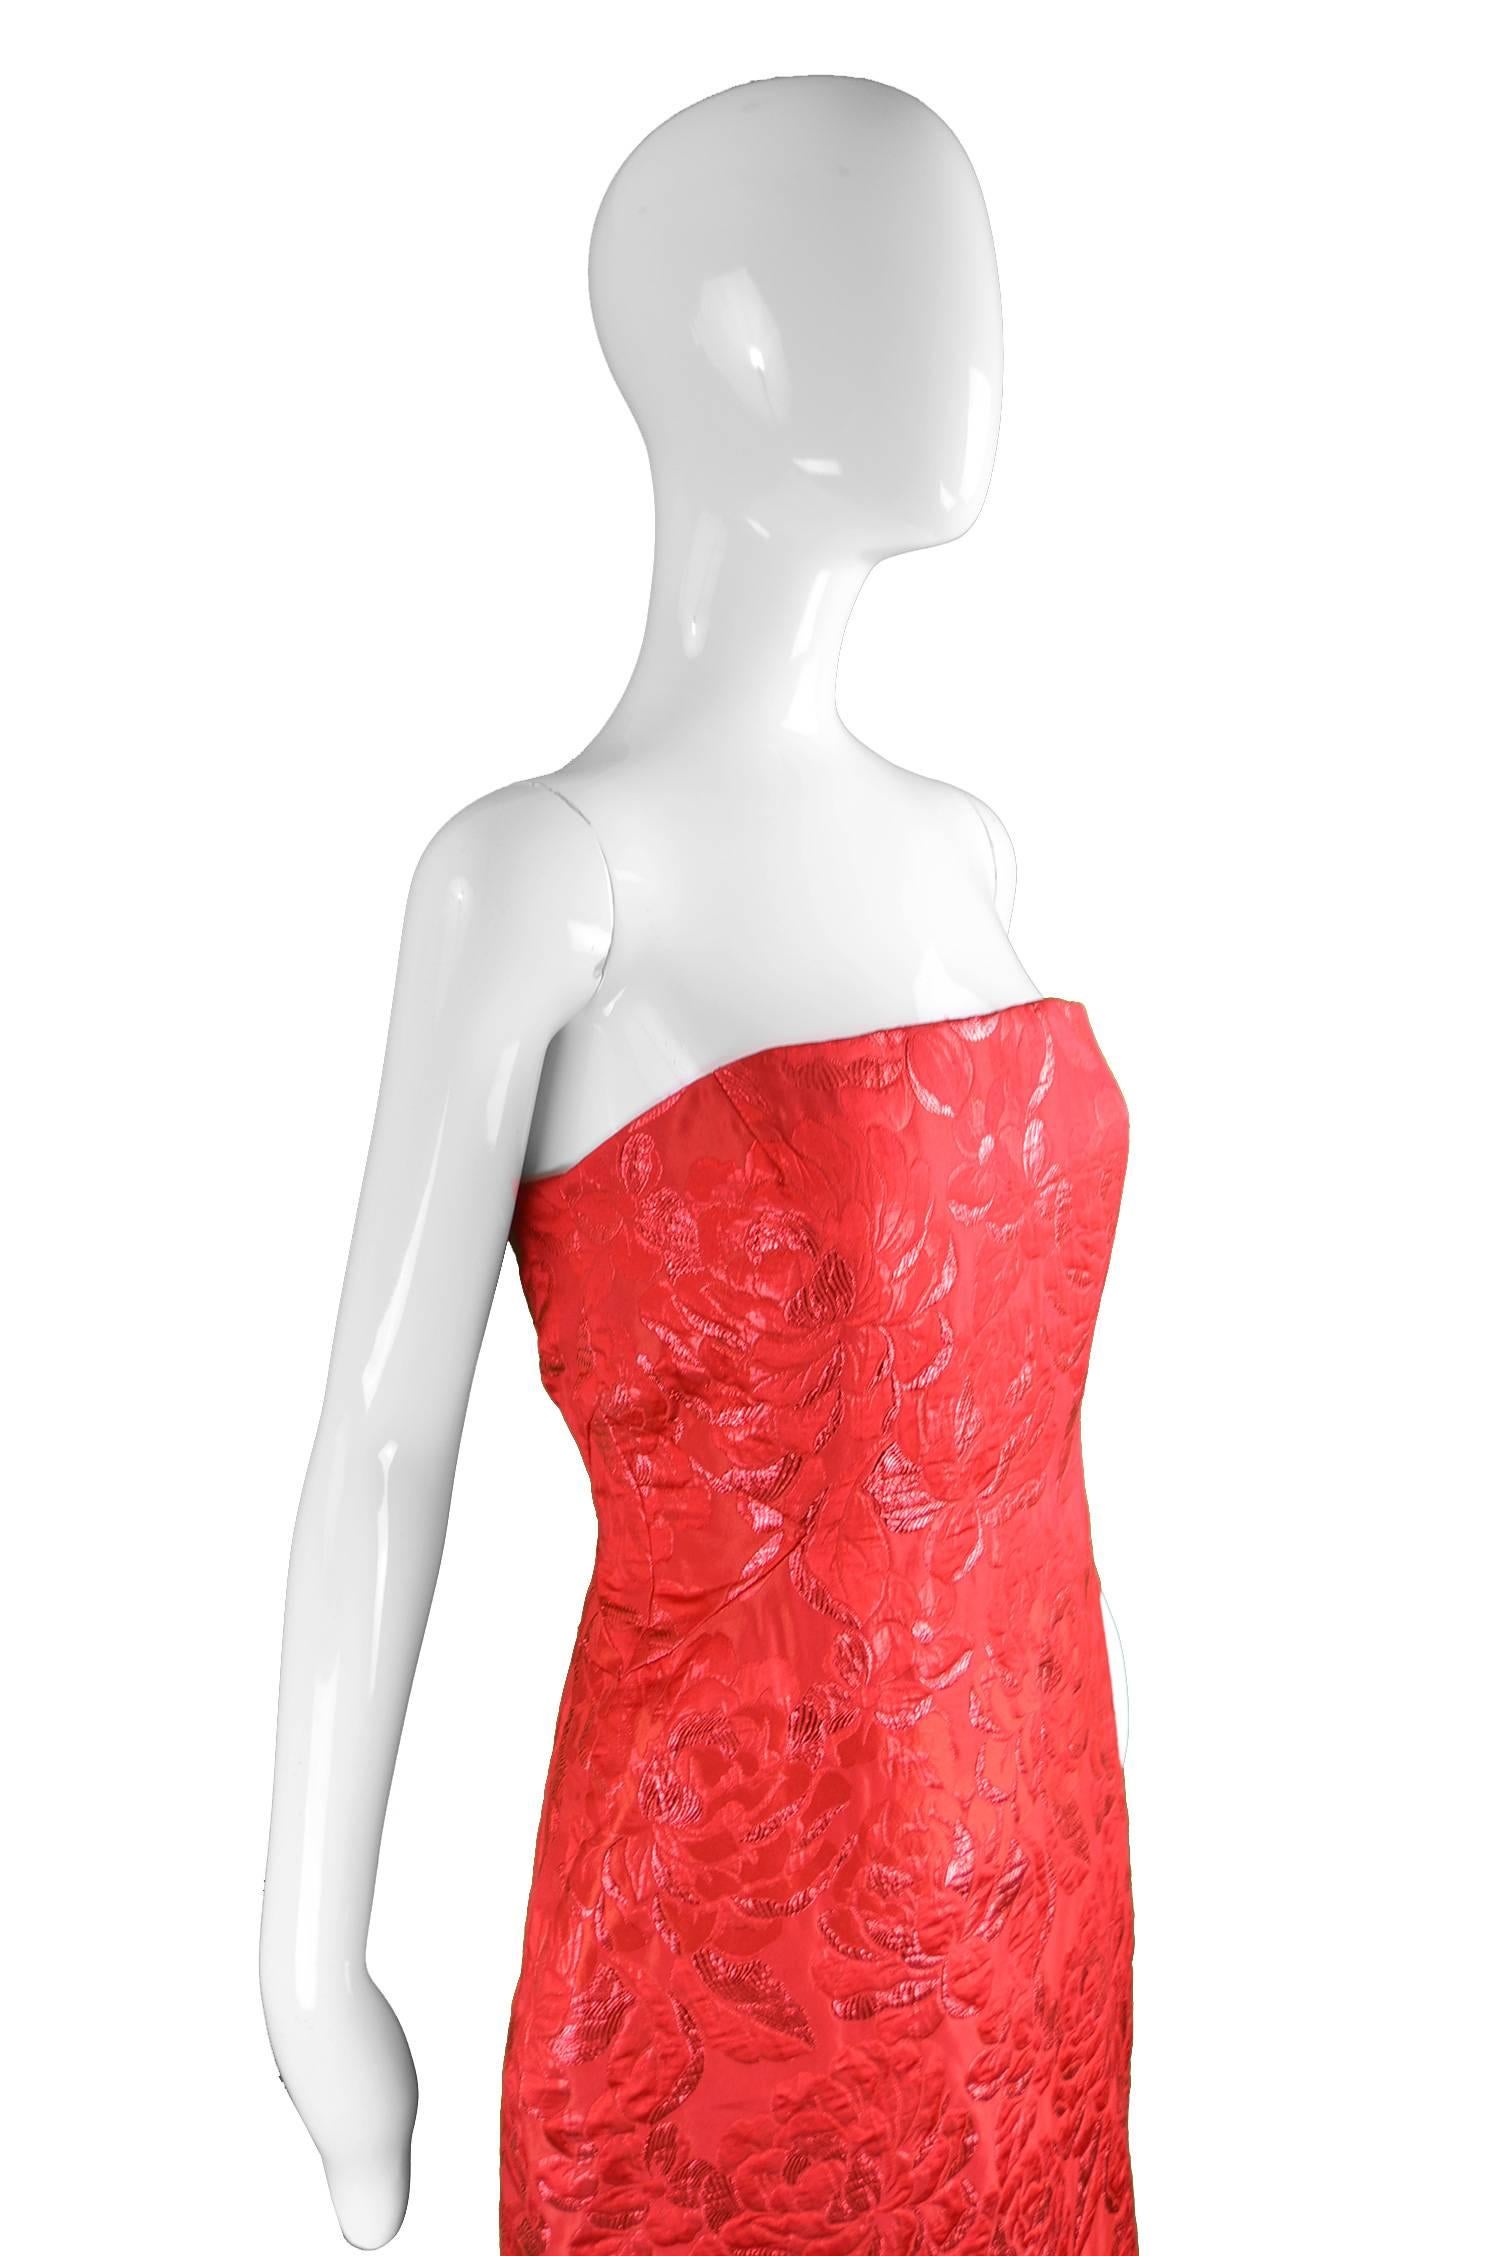 Women's Arnold Scaasi Vintage Red Floral Lamé Brocade Strapless Evening Dress, 1980s